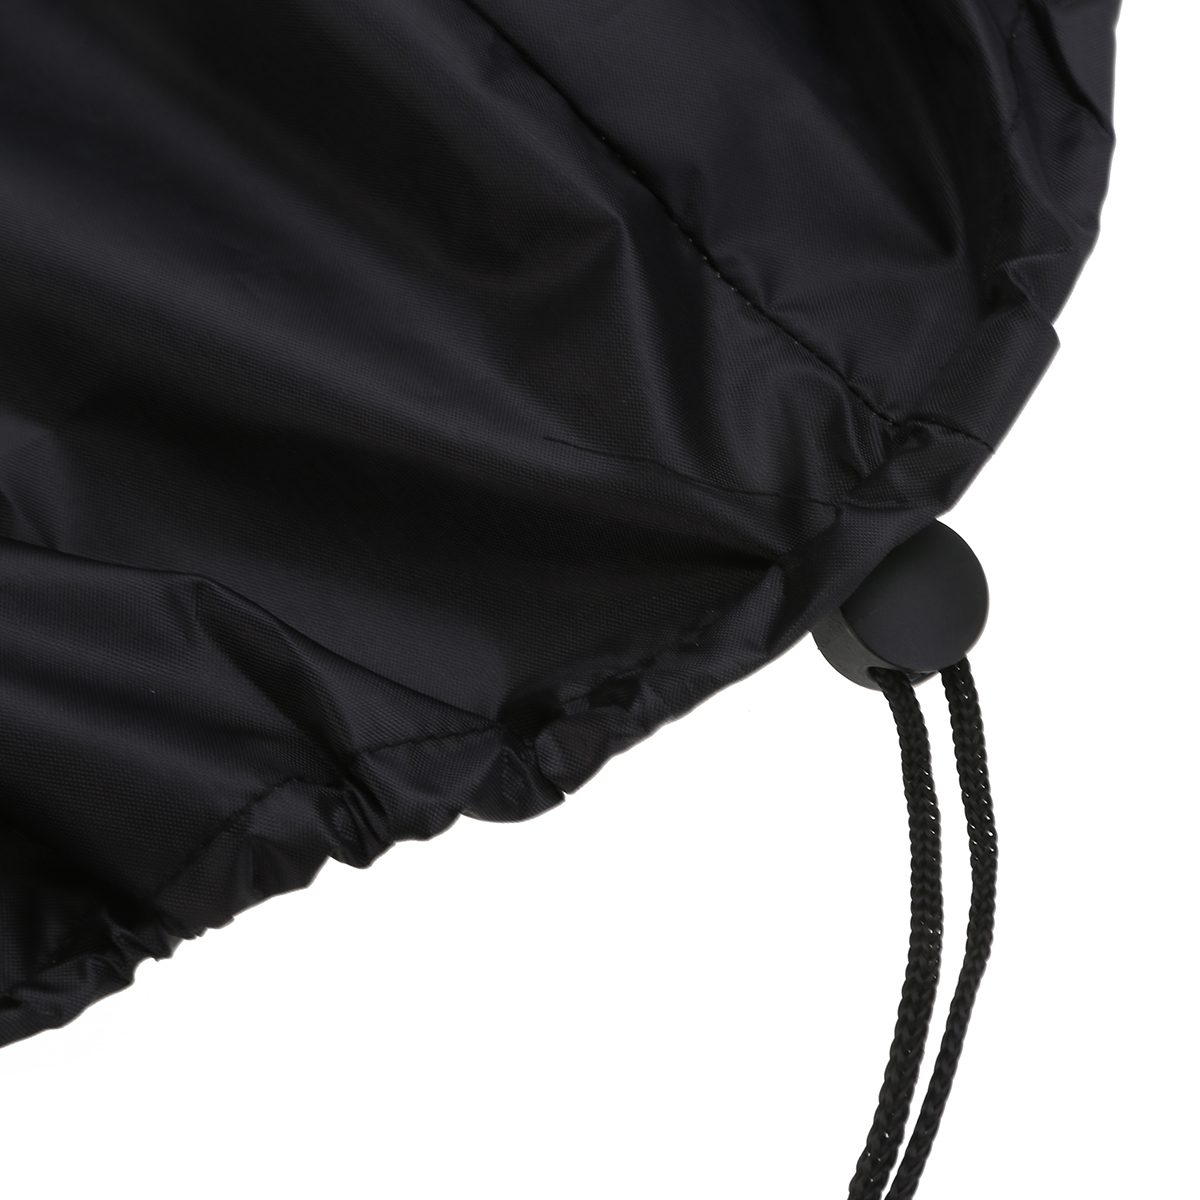 Black Waterproof Chair Dust Rain Cover For Outdoor Garden Patio Furniture Protection Luggage Protective Covers